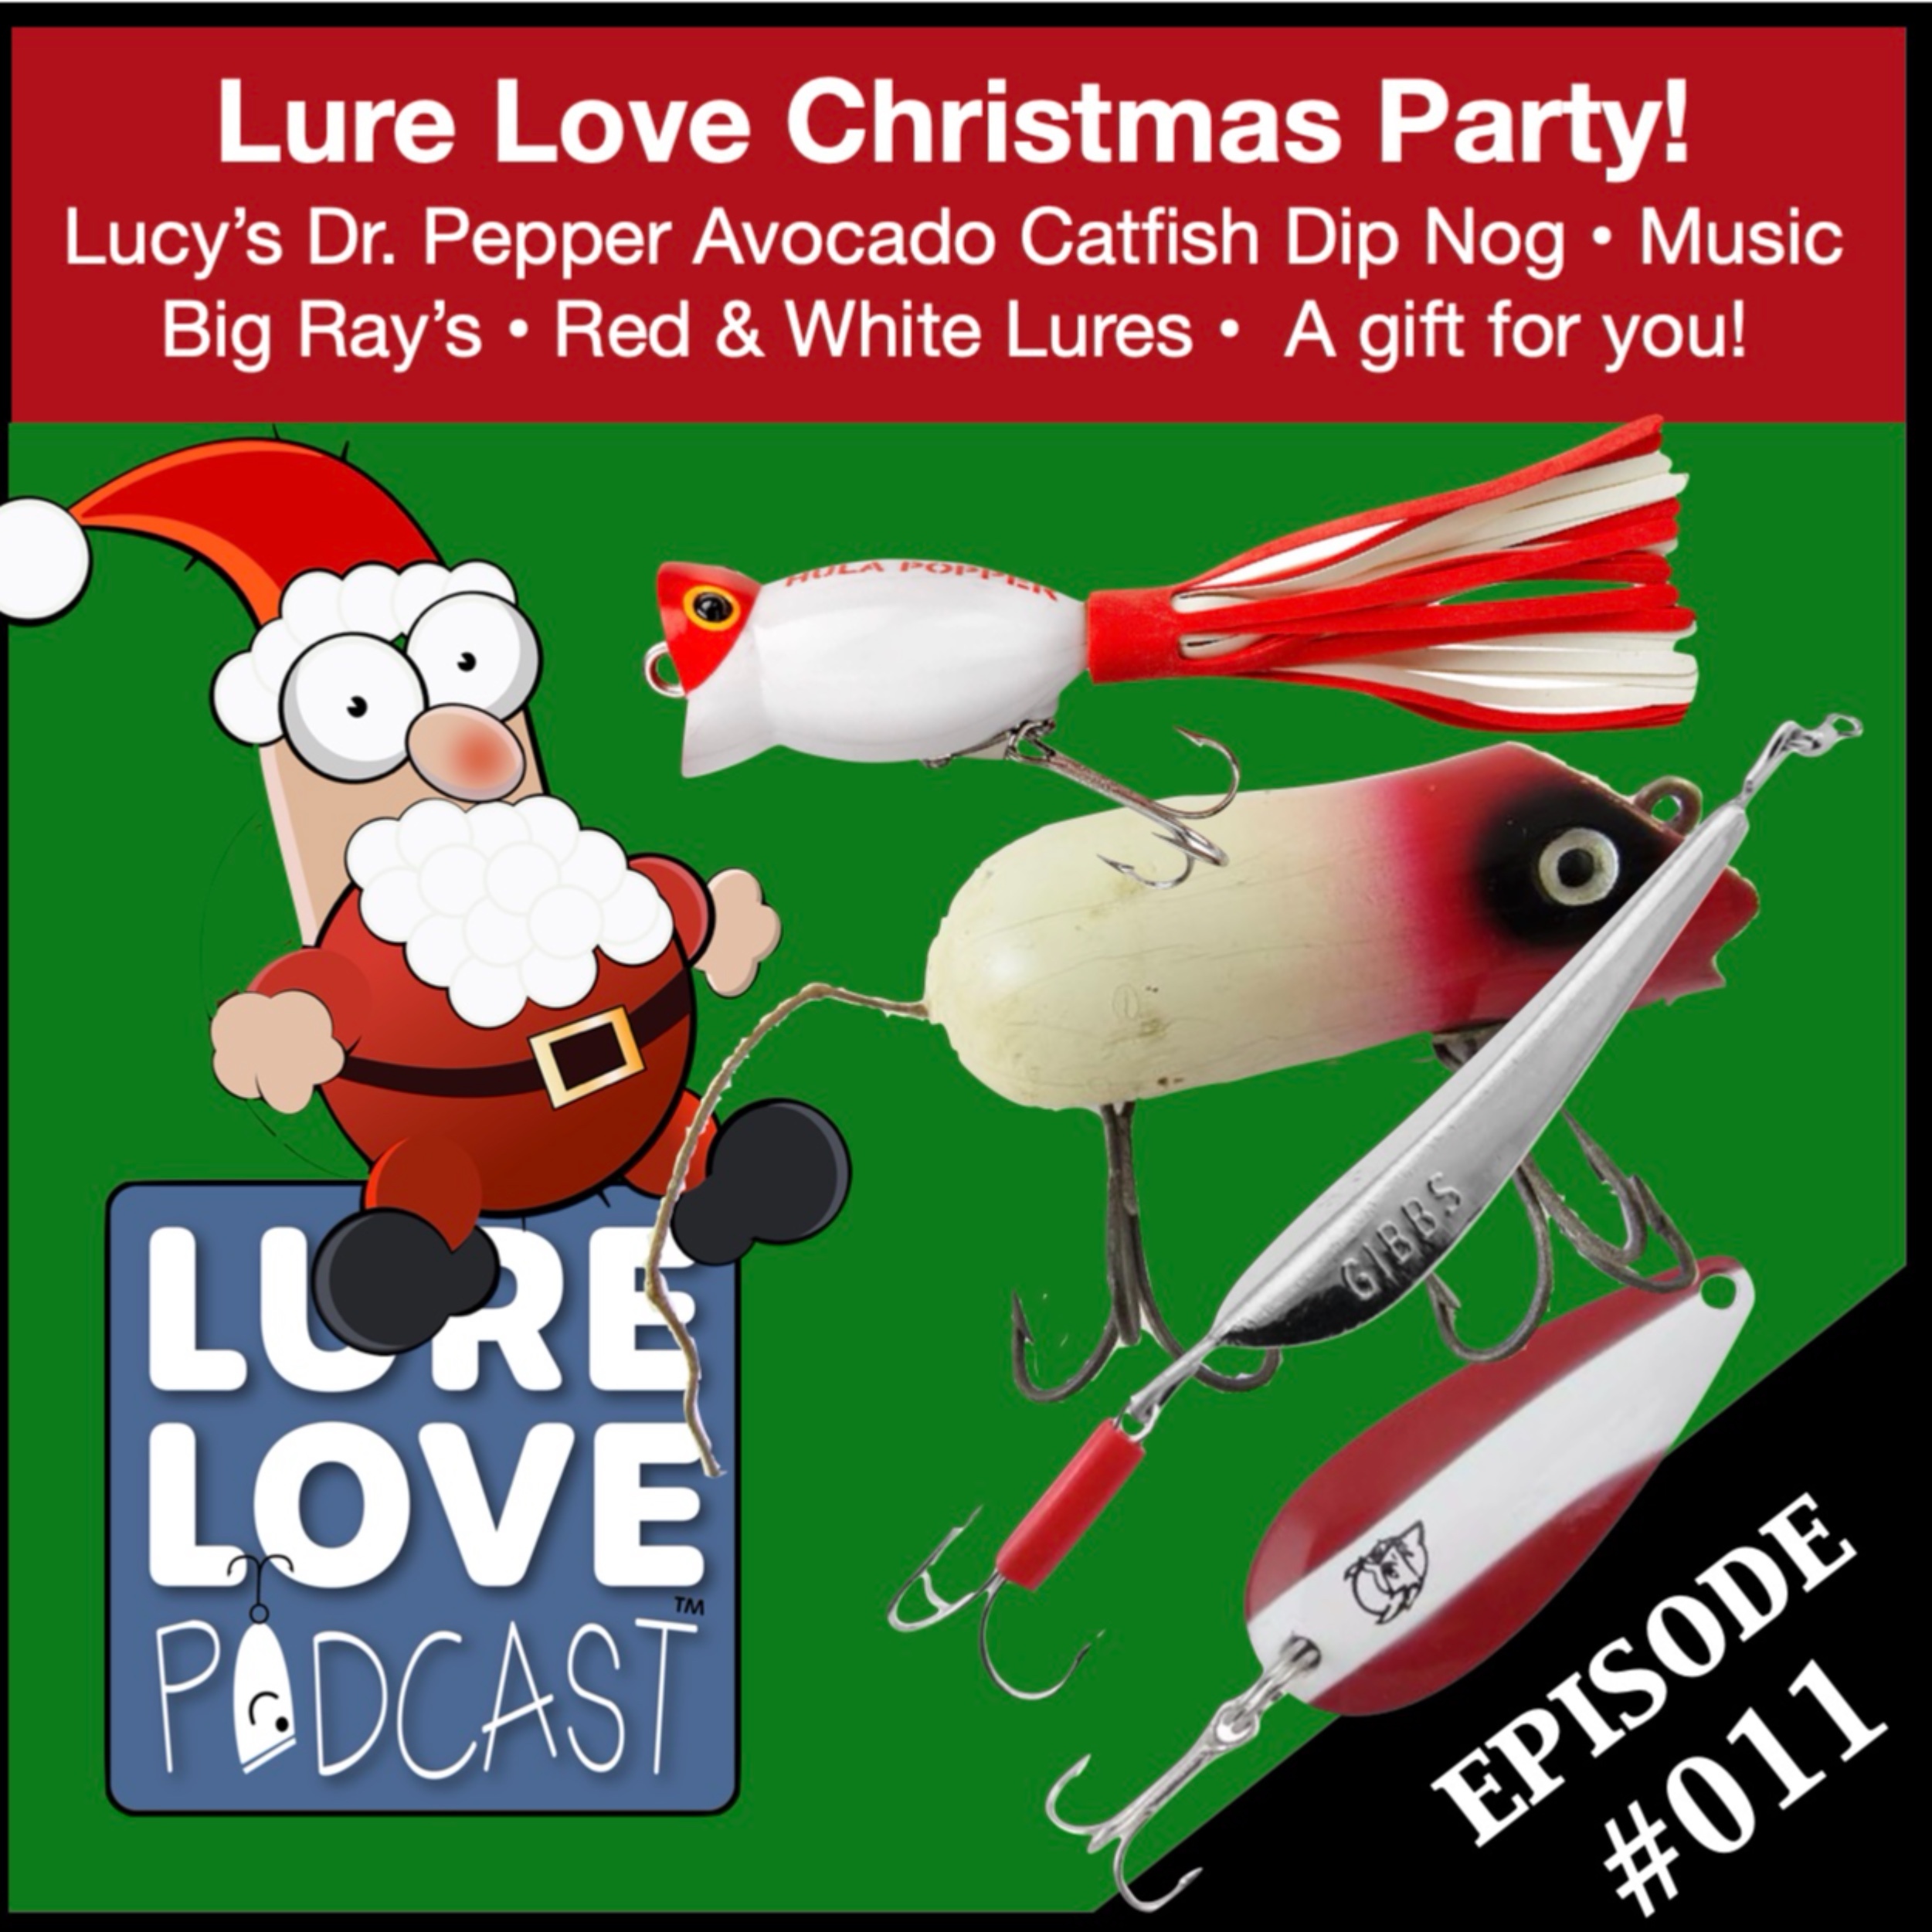 Lure Love Christmas party!